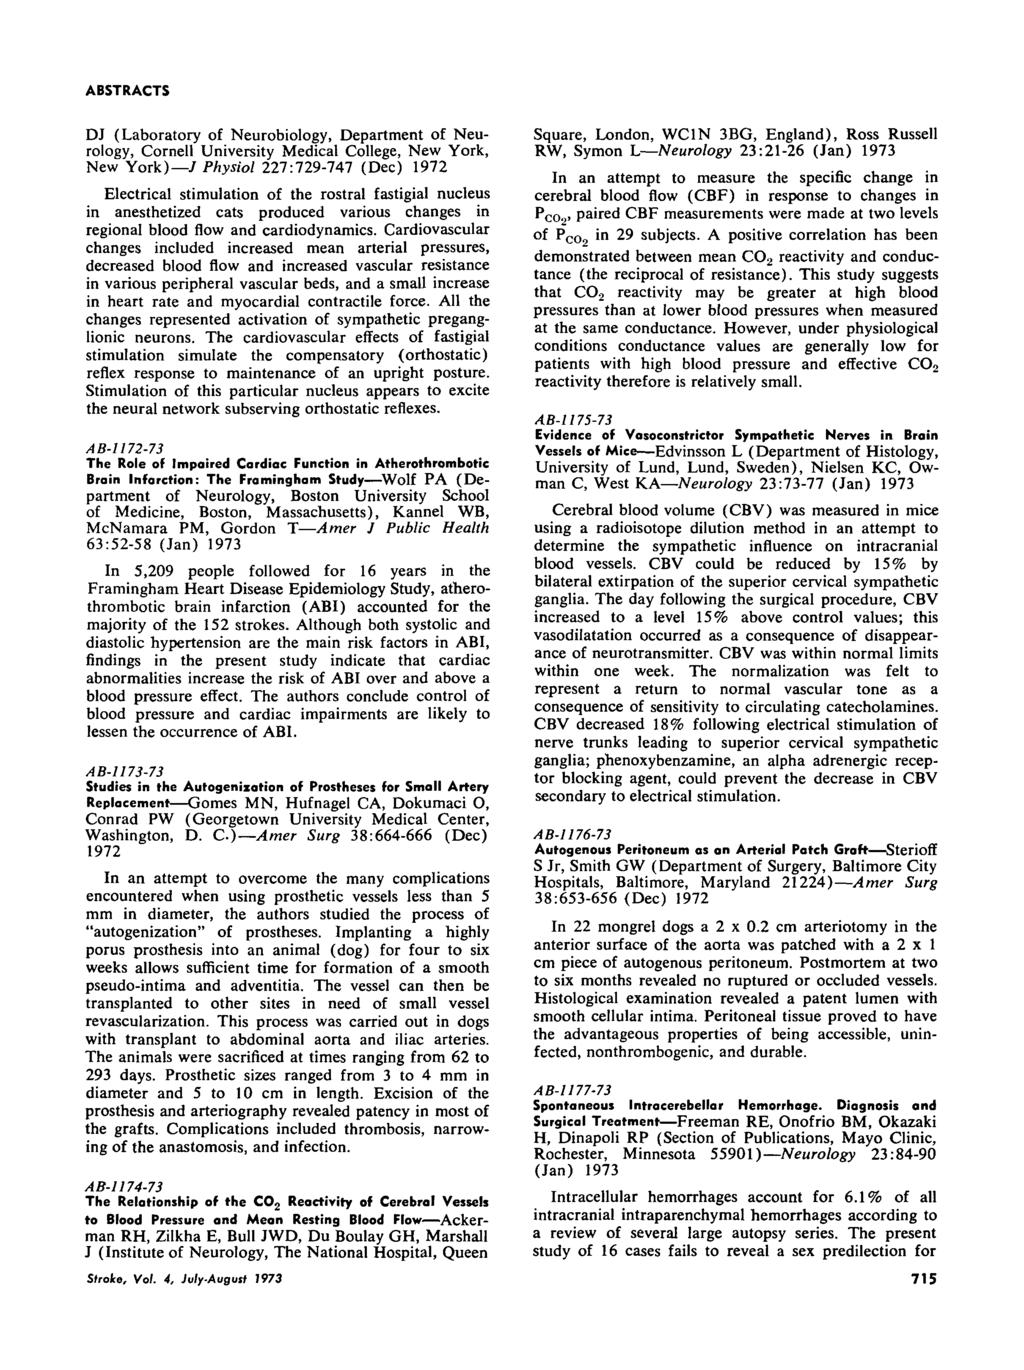 DJ (Laboratory of Neurobiology, Department of Neurology, Cornell University Medical College, New York, New York) / Physiol 227:729-747 (Dec) 1972 Electrical stimulation of the rostral fastigial